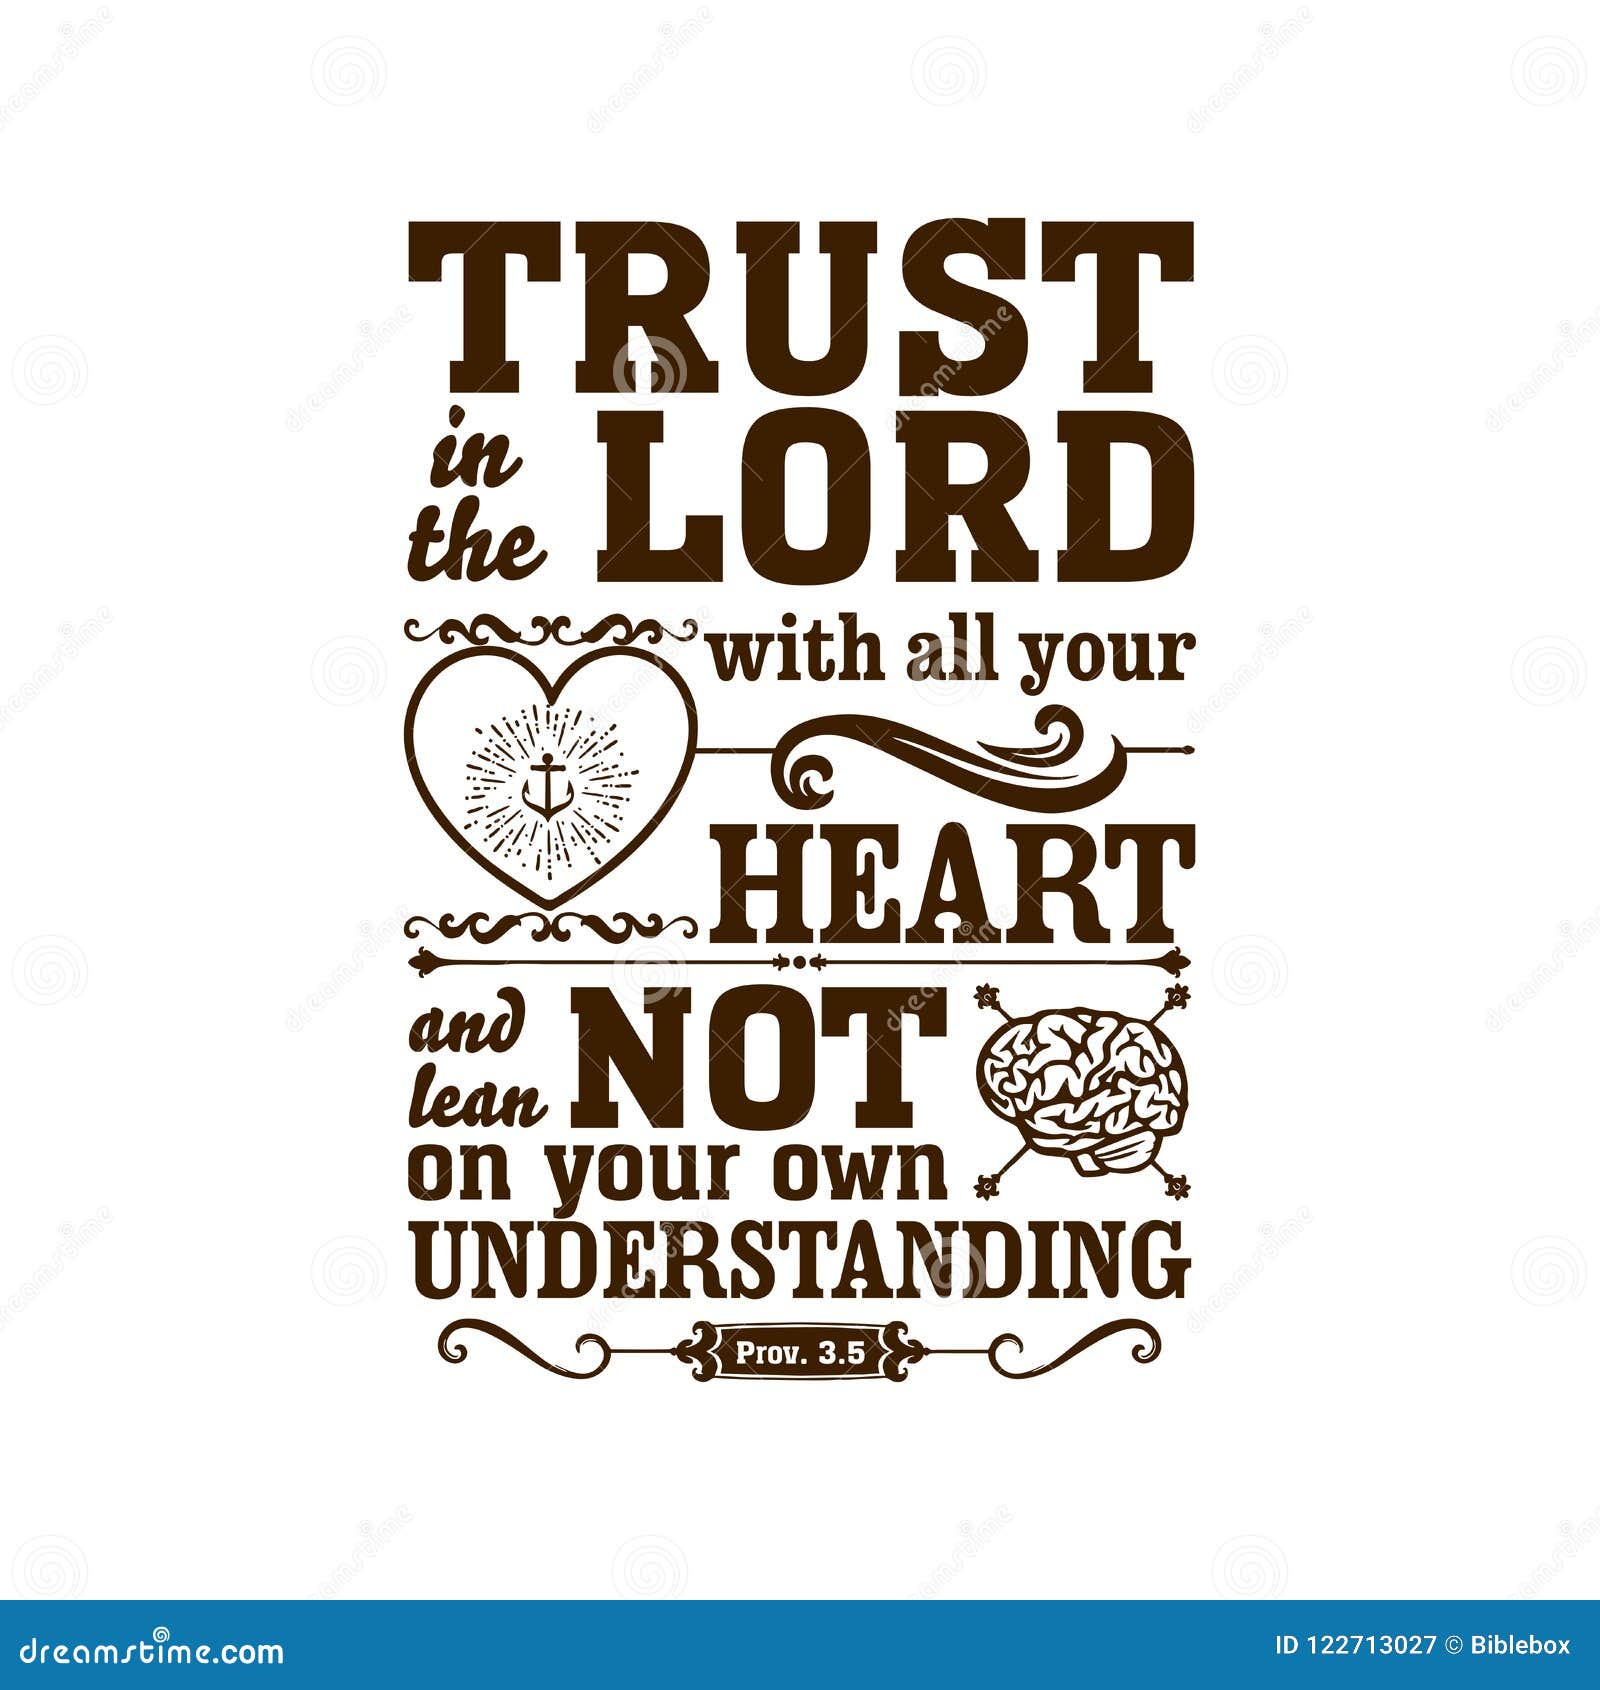 biblical-illustration-trust-in-the-lord-with-all-your-heart-and-do